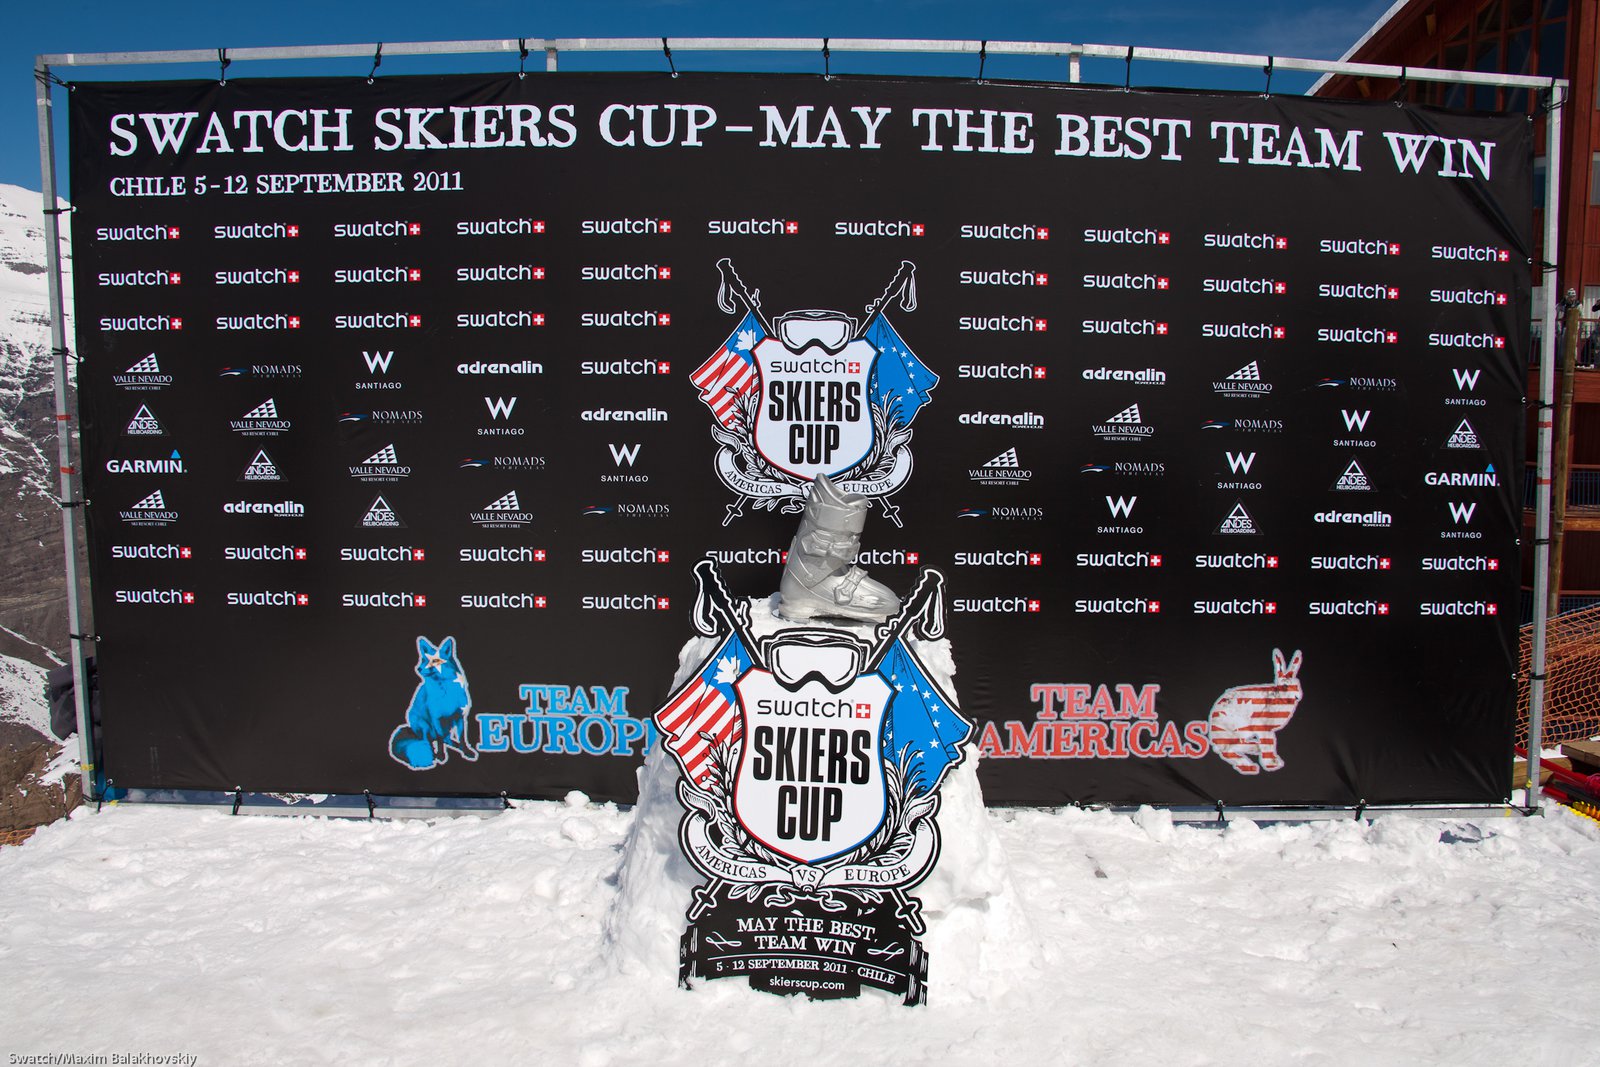 The Swatch Skiers Cup